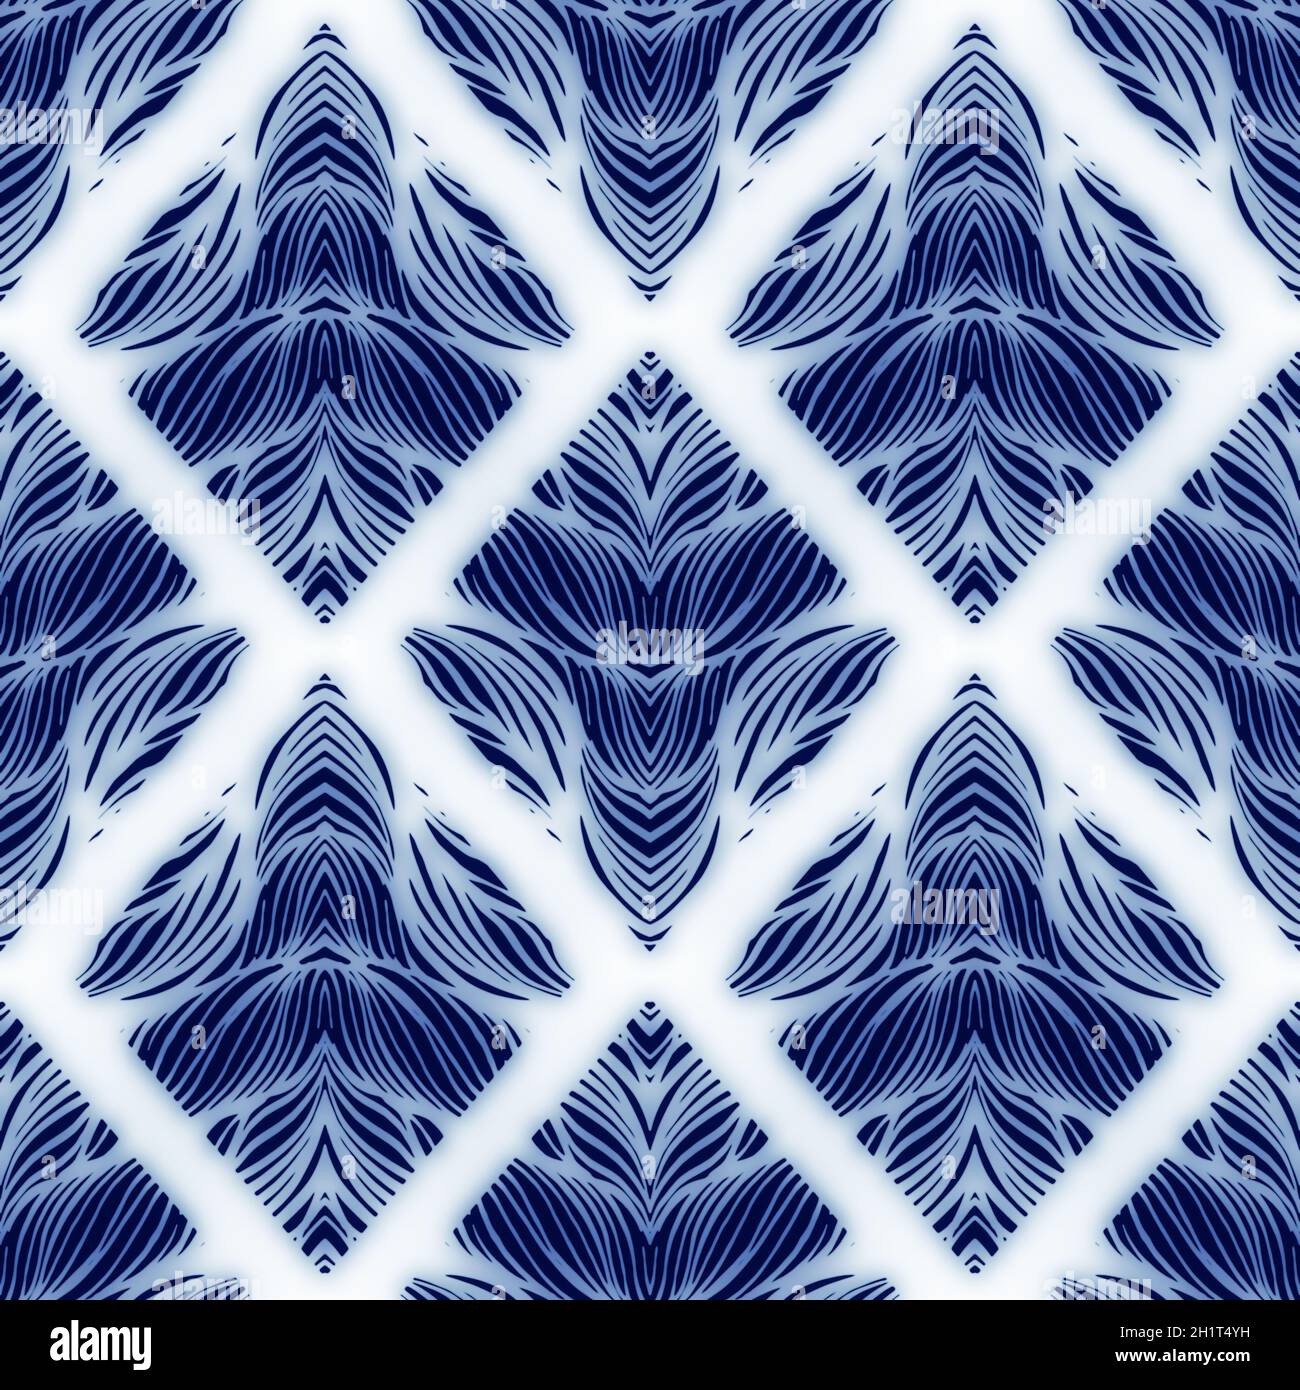 Seamless blue and white ceramic tile ornate damask pattern for surface design and print Stock Photo